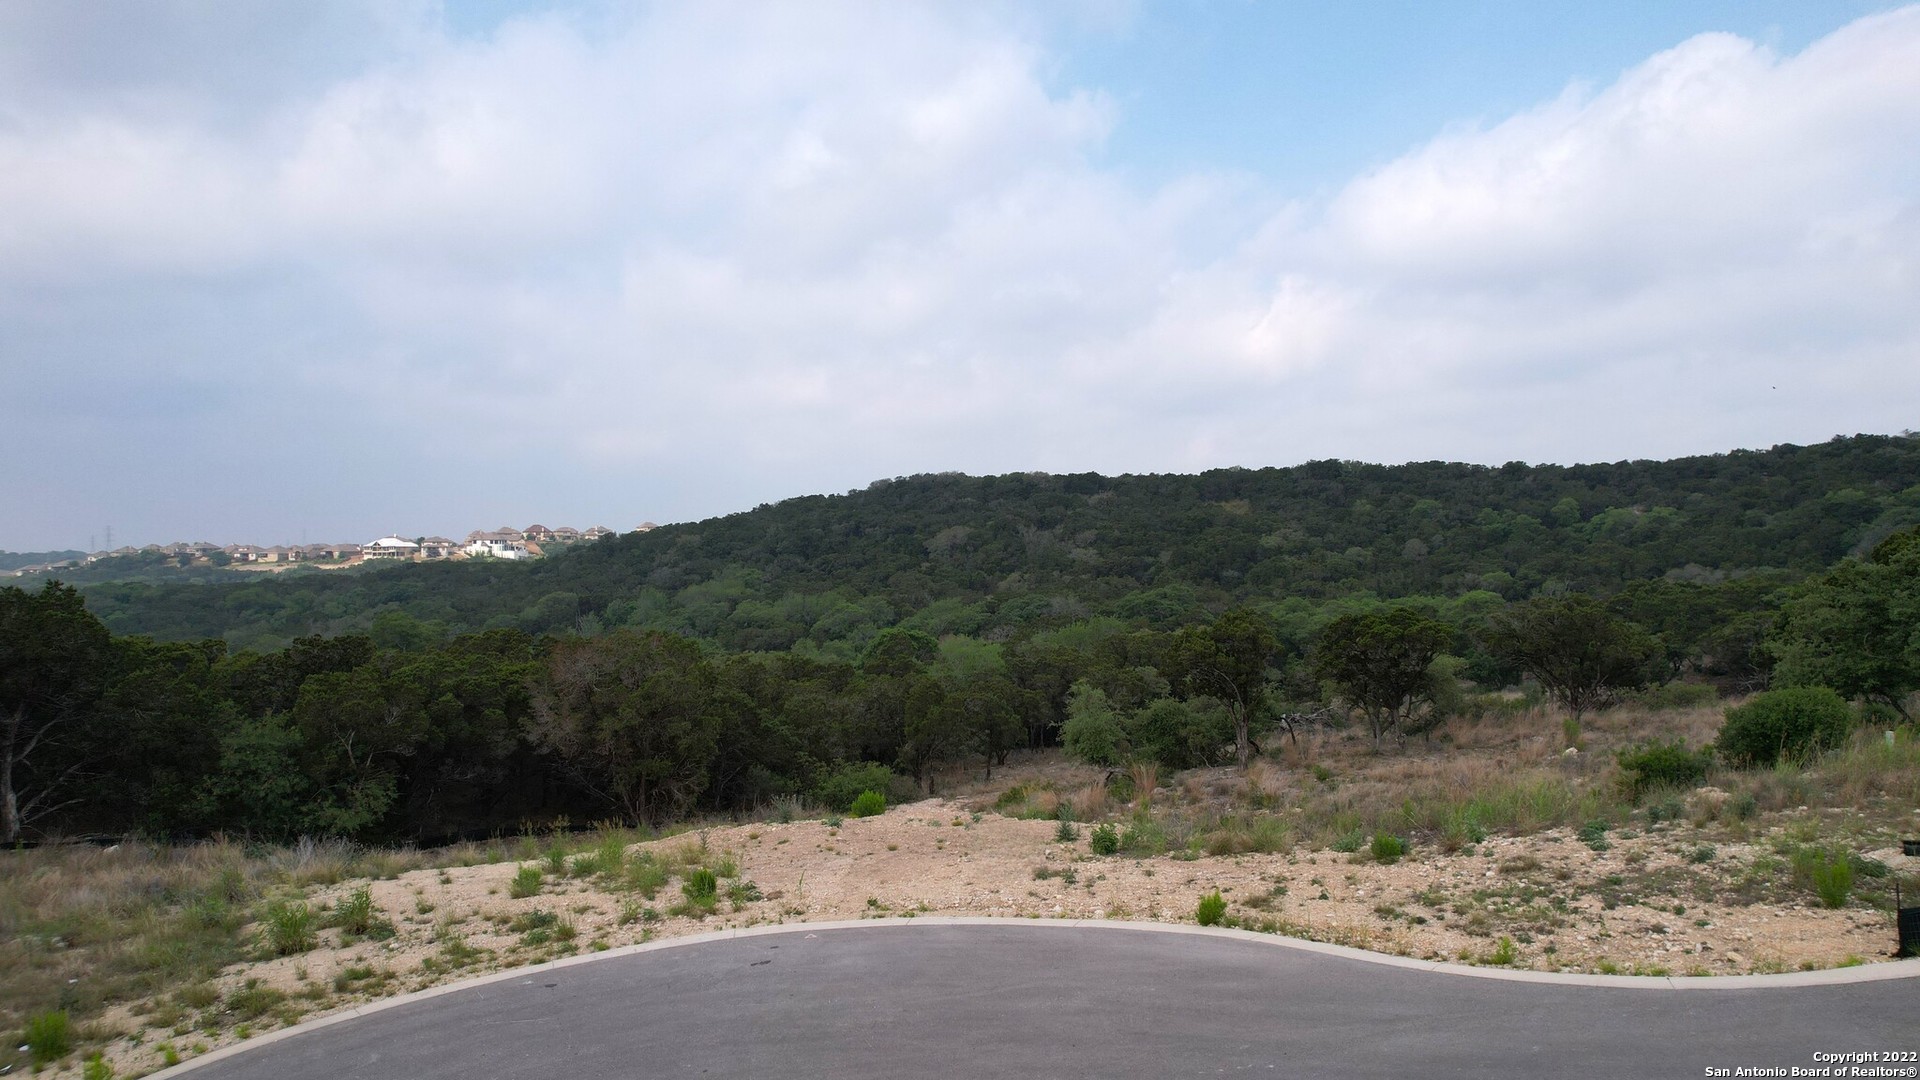 Rare opportunity. 5 acres! Build your dream home in the beautiful hill country with a valley breeze. Located on a cul-de-sac. Established neighborhood. Controlled access. North and West bordered by 7.4 Ares tree conservation. 80 acres Crown Ridge Park to the South. Valley views of parkland. Complete Privacy of 20 + acres with surroundings!! Follow green stakes to proposed building site with view. property line is roughly 40 ft past the old ranch fence. It is marked by several orange ribbons on tree limbs. Close to I10, shopping, restaurants, entertainment, 20 minutes from downtown San Antonio. Buyer to verify taxes, lot dimensions, school districts.